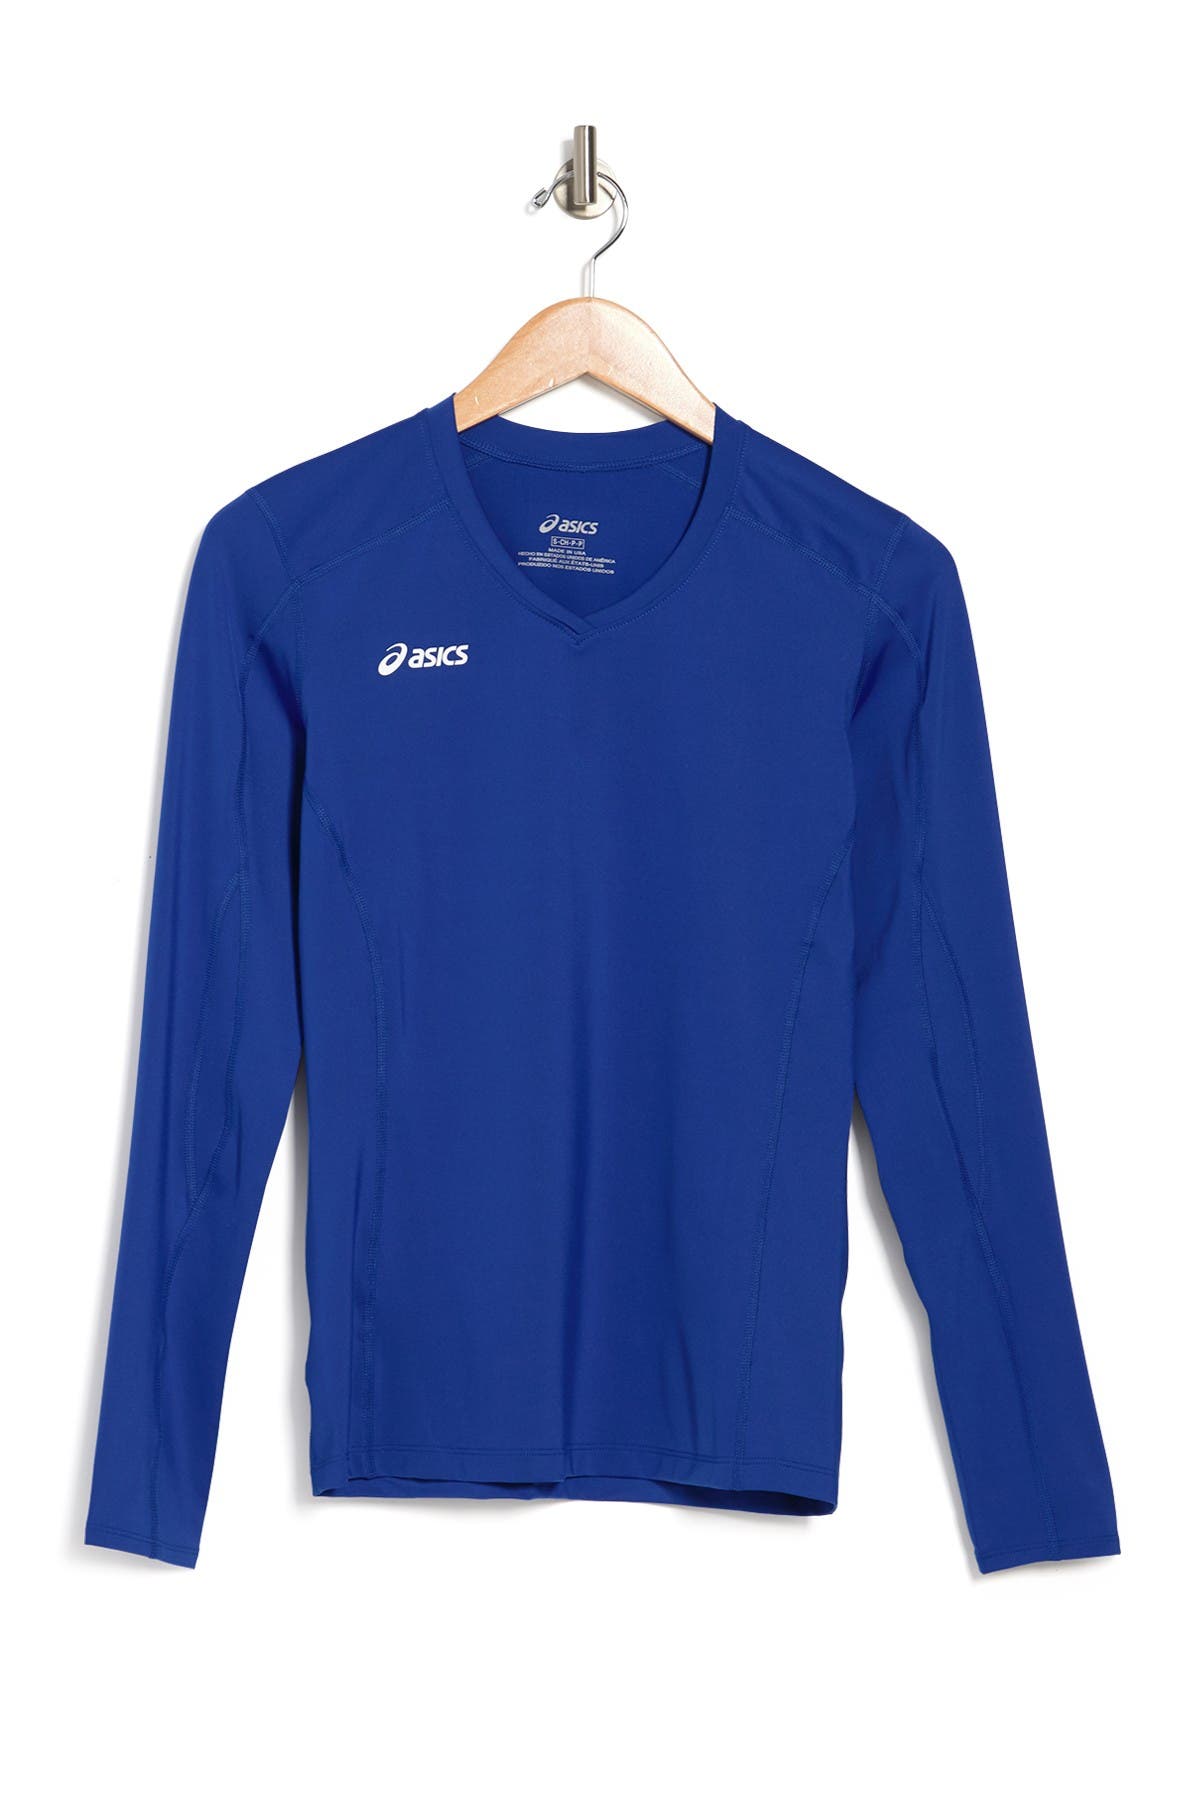 Asics Roll Shot Performance Jersey In Royal